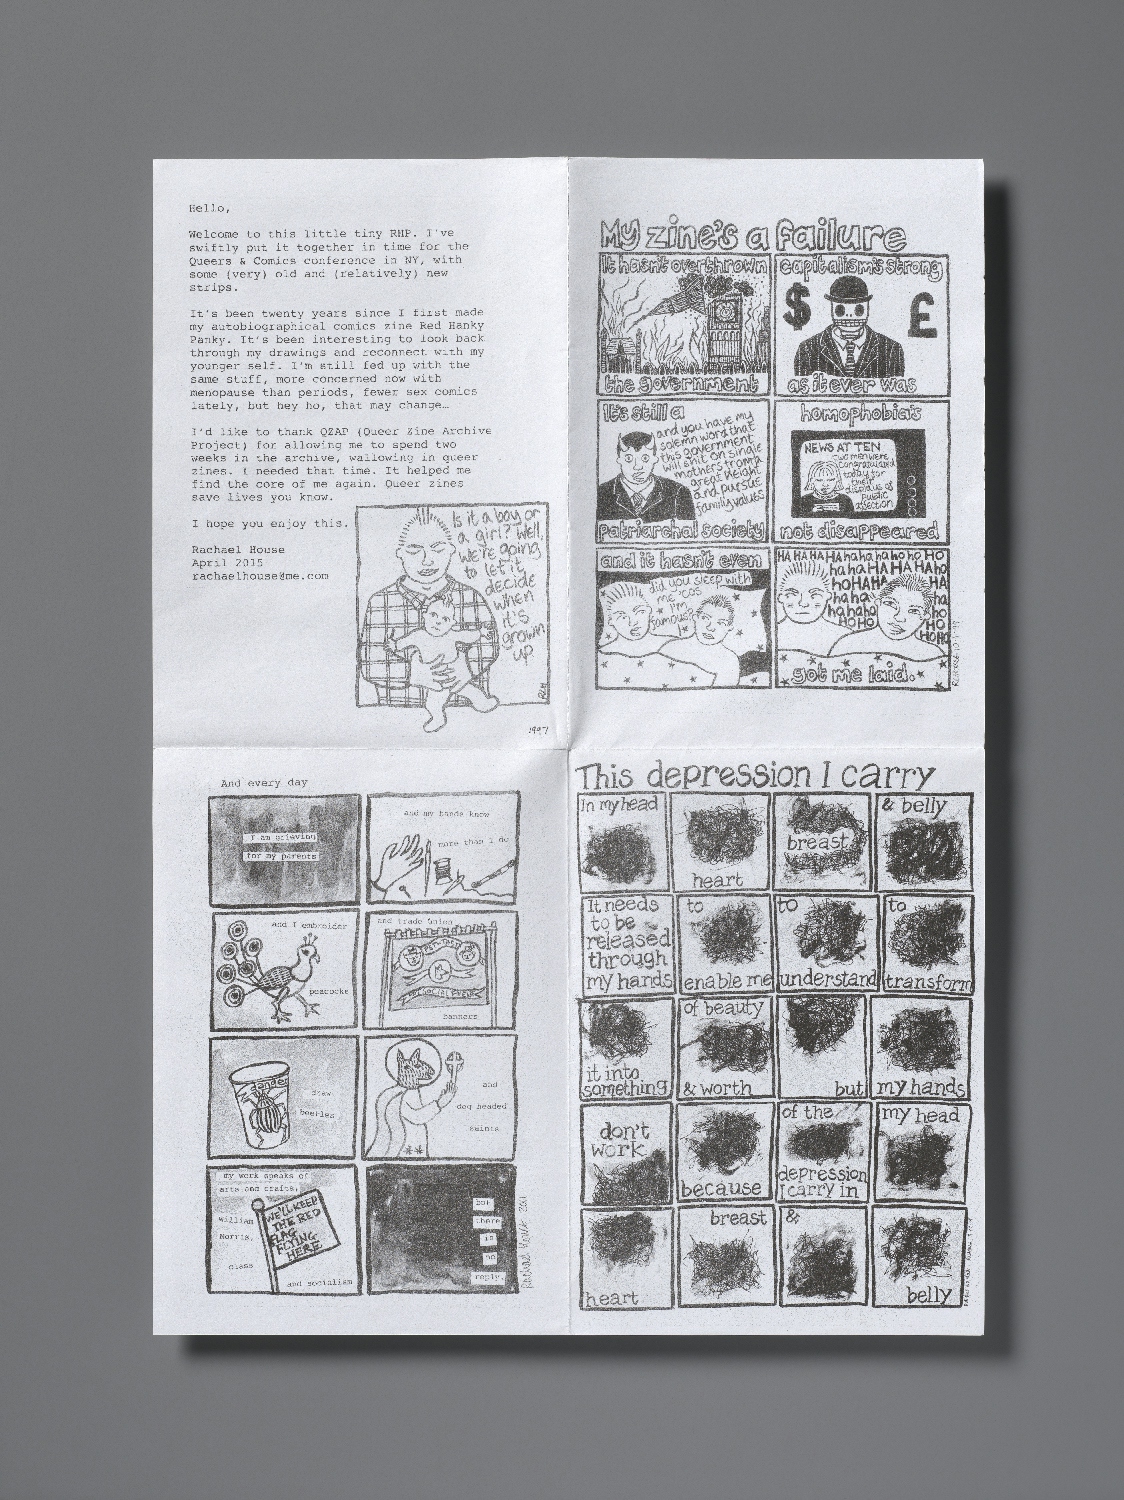 A large sheet of paper folded into four pages, each containing detailed text and comic panels from the zine ‘Red Hanky Panky 9’. The top left page is an introduction to the zine by the zine-maker and the other three pages each contain a different comic strip, with the titles: ‘My zine’s a failure’, ‘and every day’ and ‘This depression I carry’.